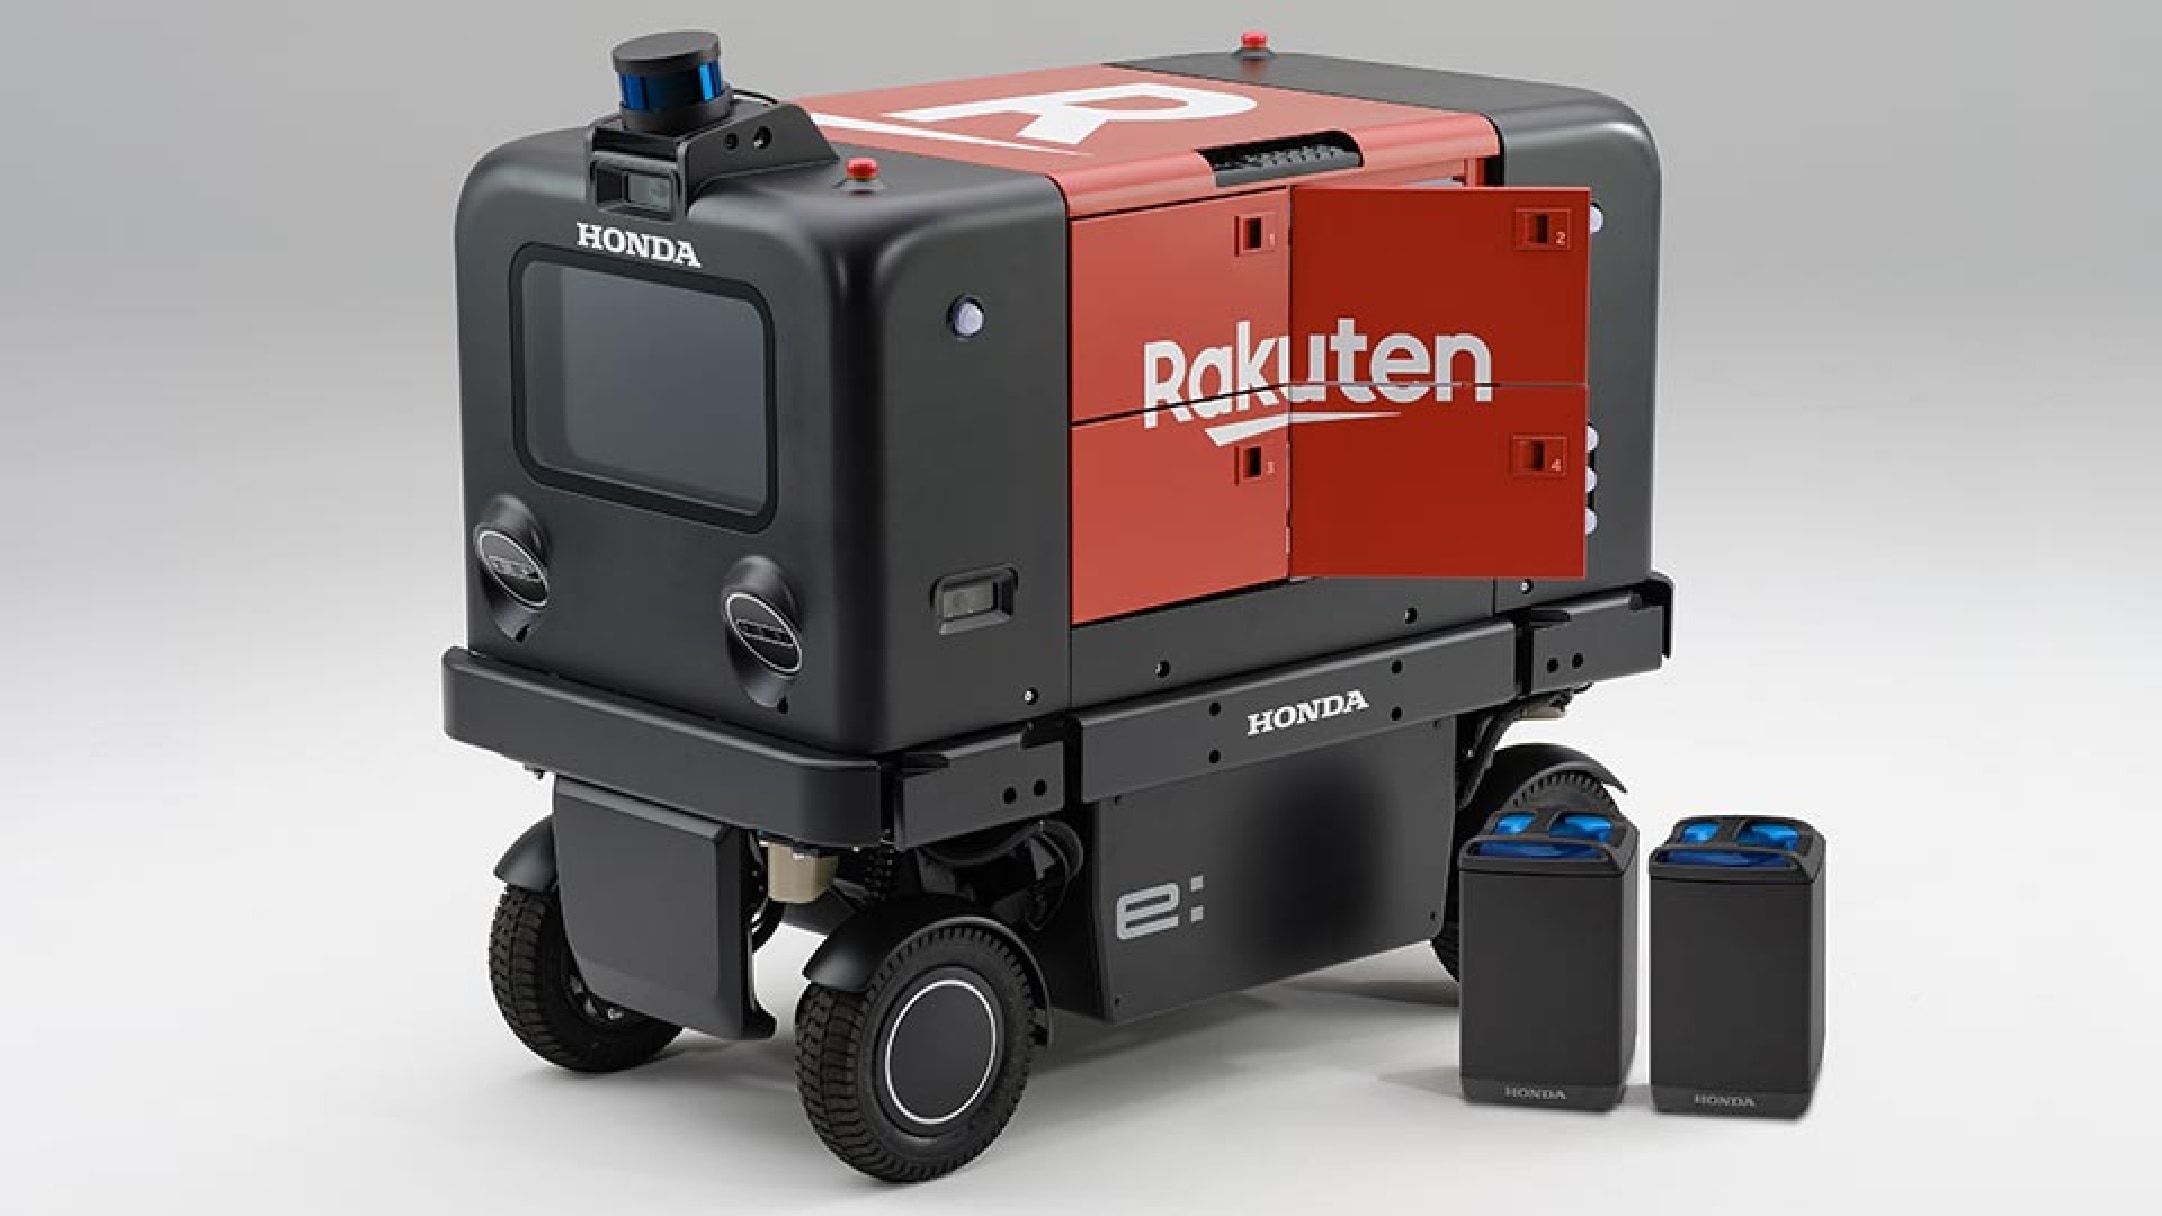 The trial used an autonomous delivery robot powered by two Honda Mobile Power Packs mounted between the front and rear wheels.